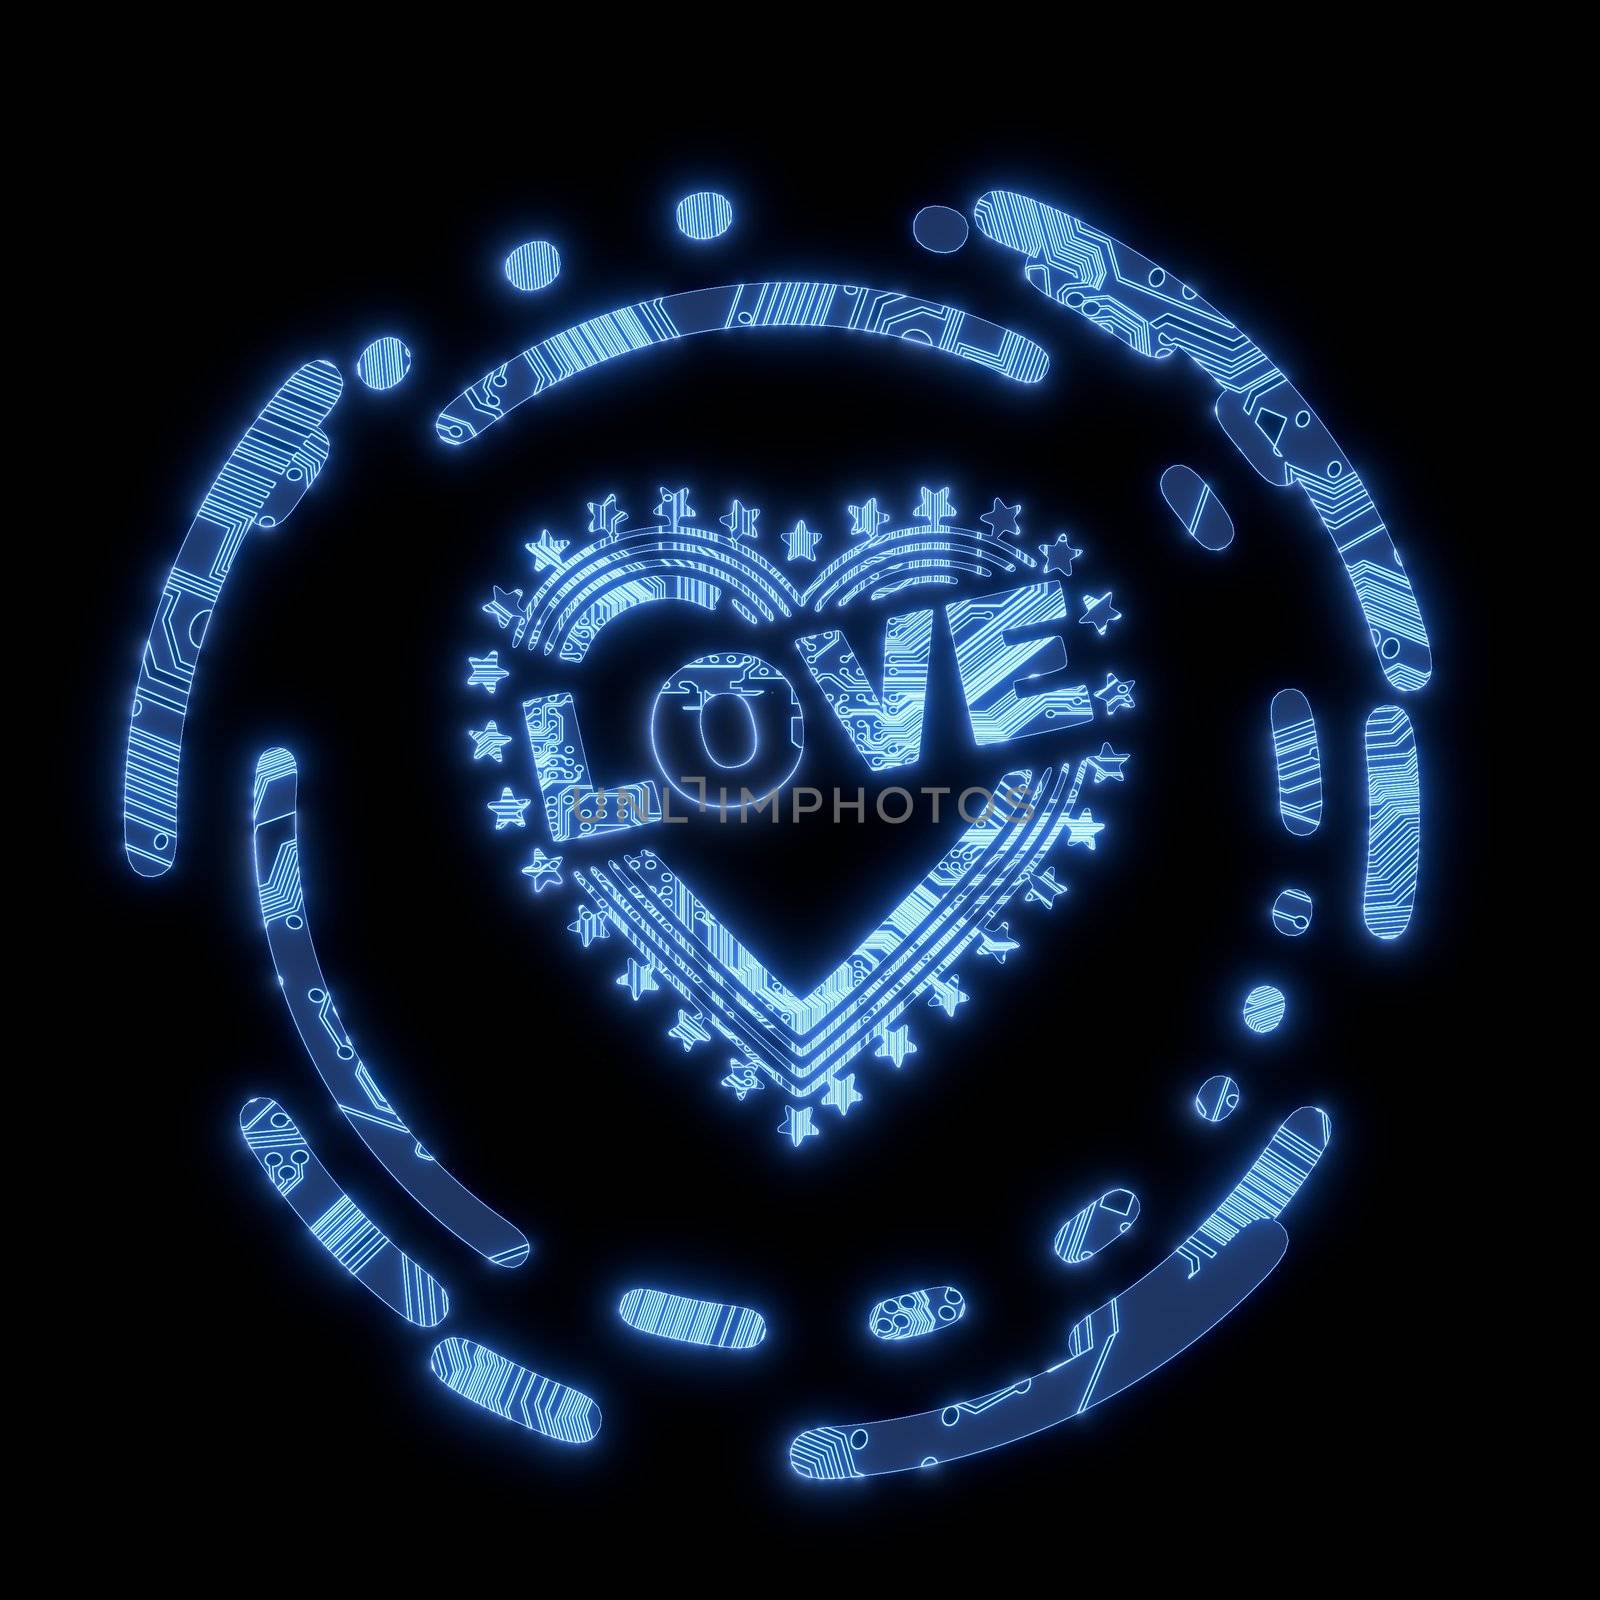 Illuminated blue computer heart with stars symbol by onirb